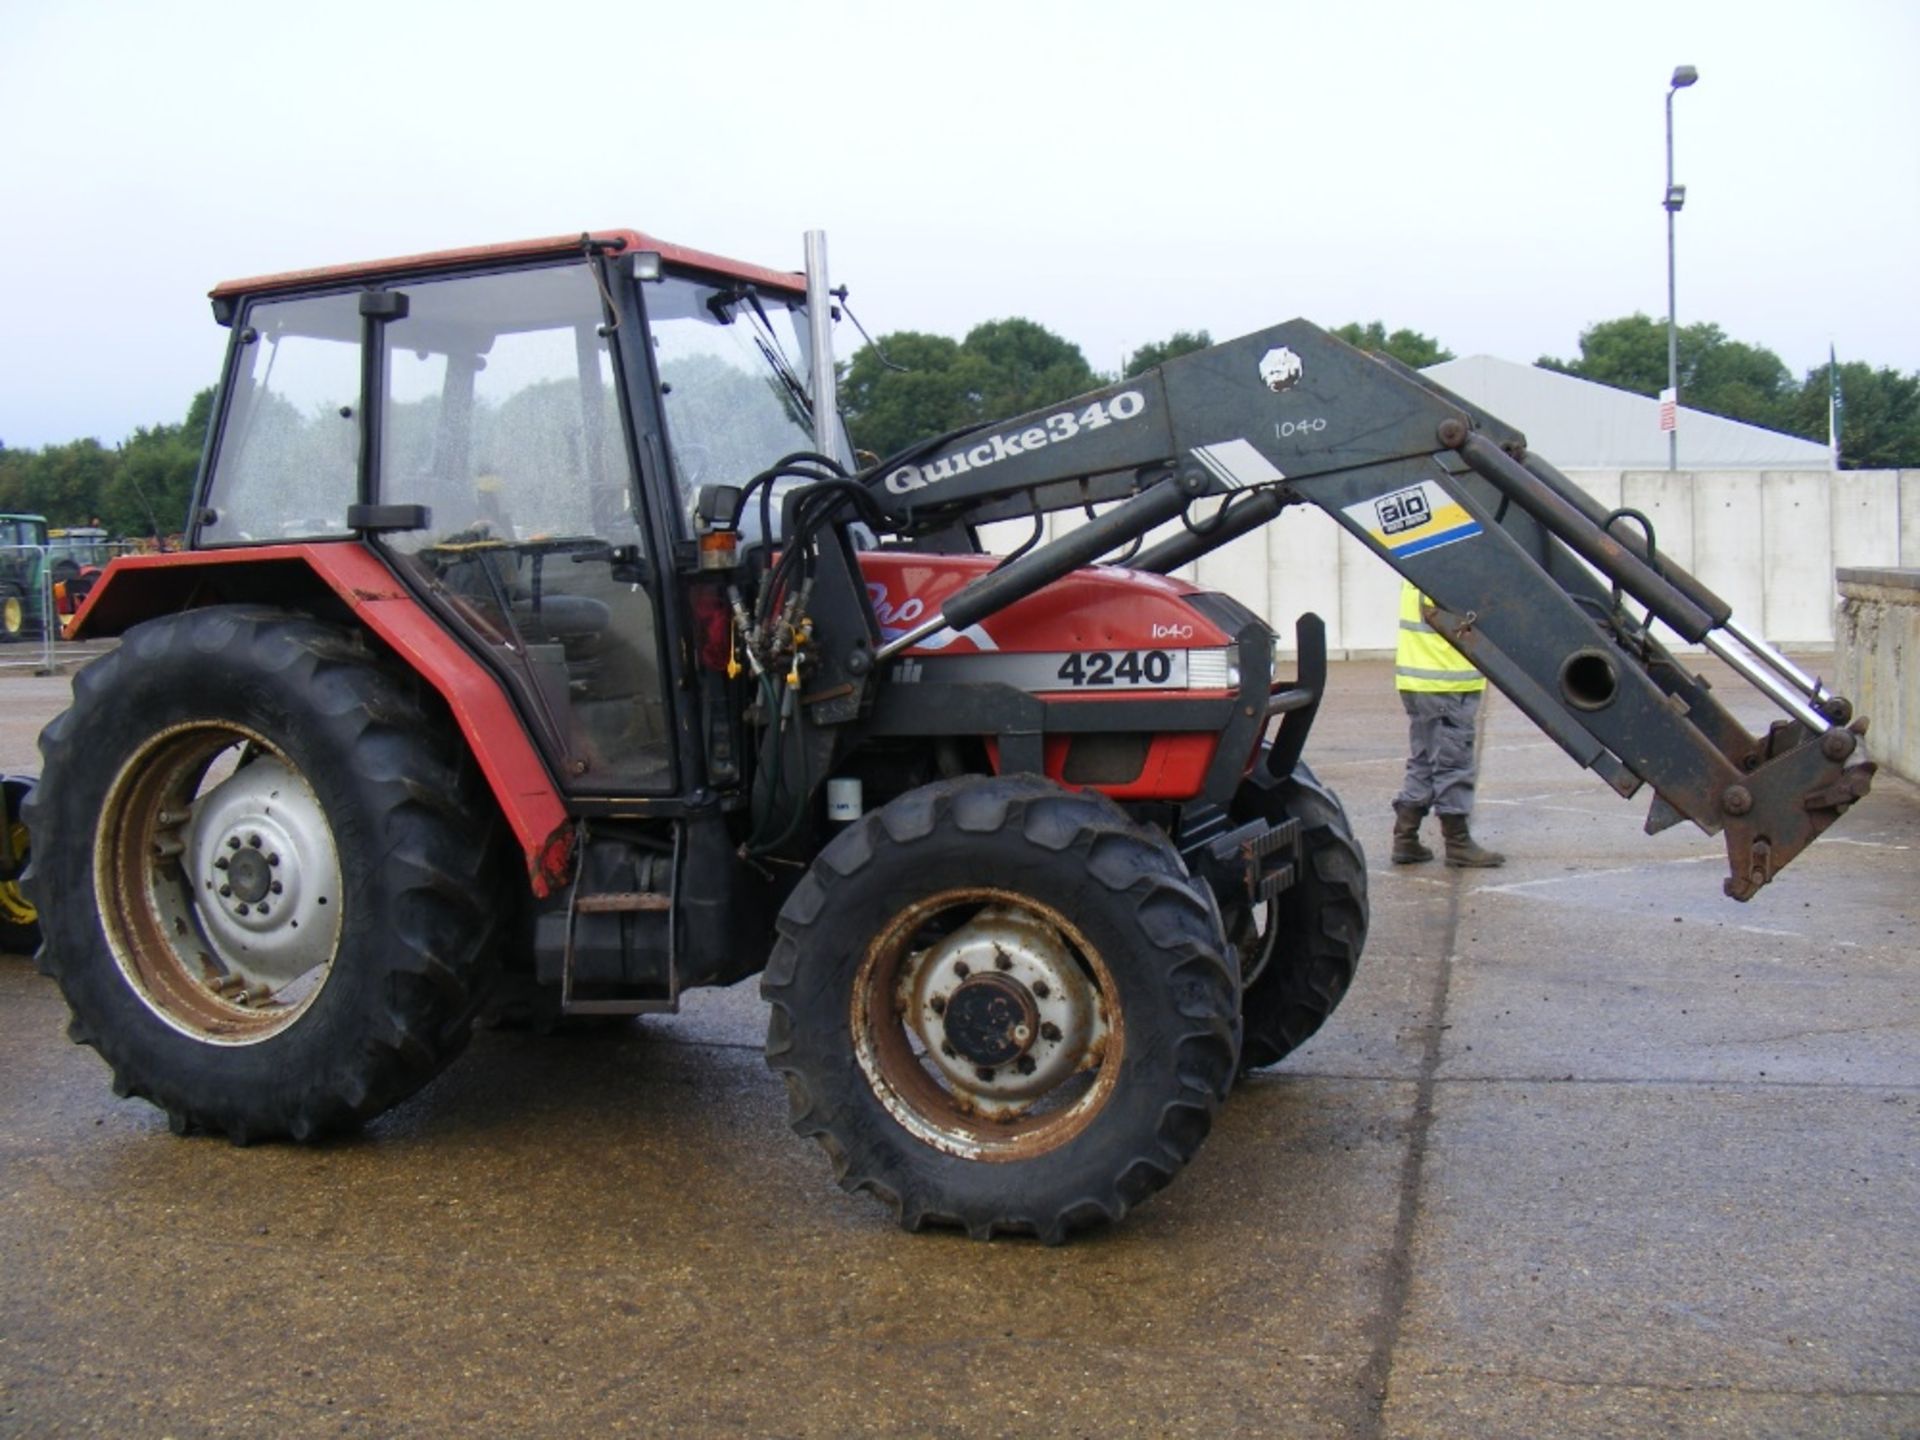 Case International 4240 Pro 4wd Tractor with Quicke 340 Loader. V5 will be supplied. Reg. No. P307 - Image 4 of 6